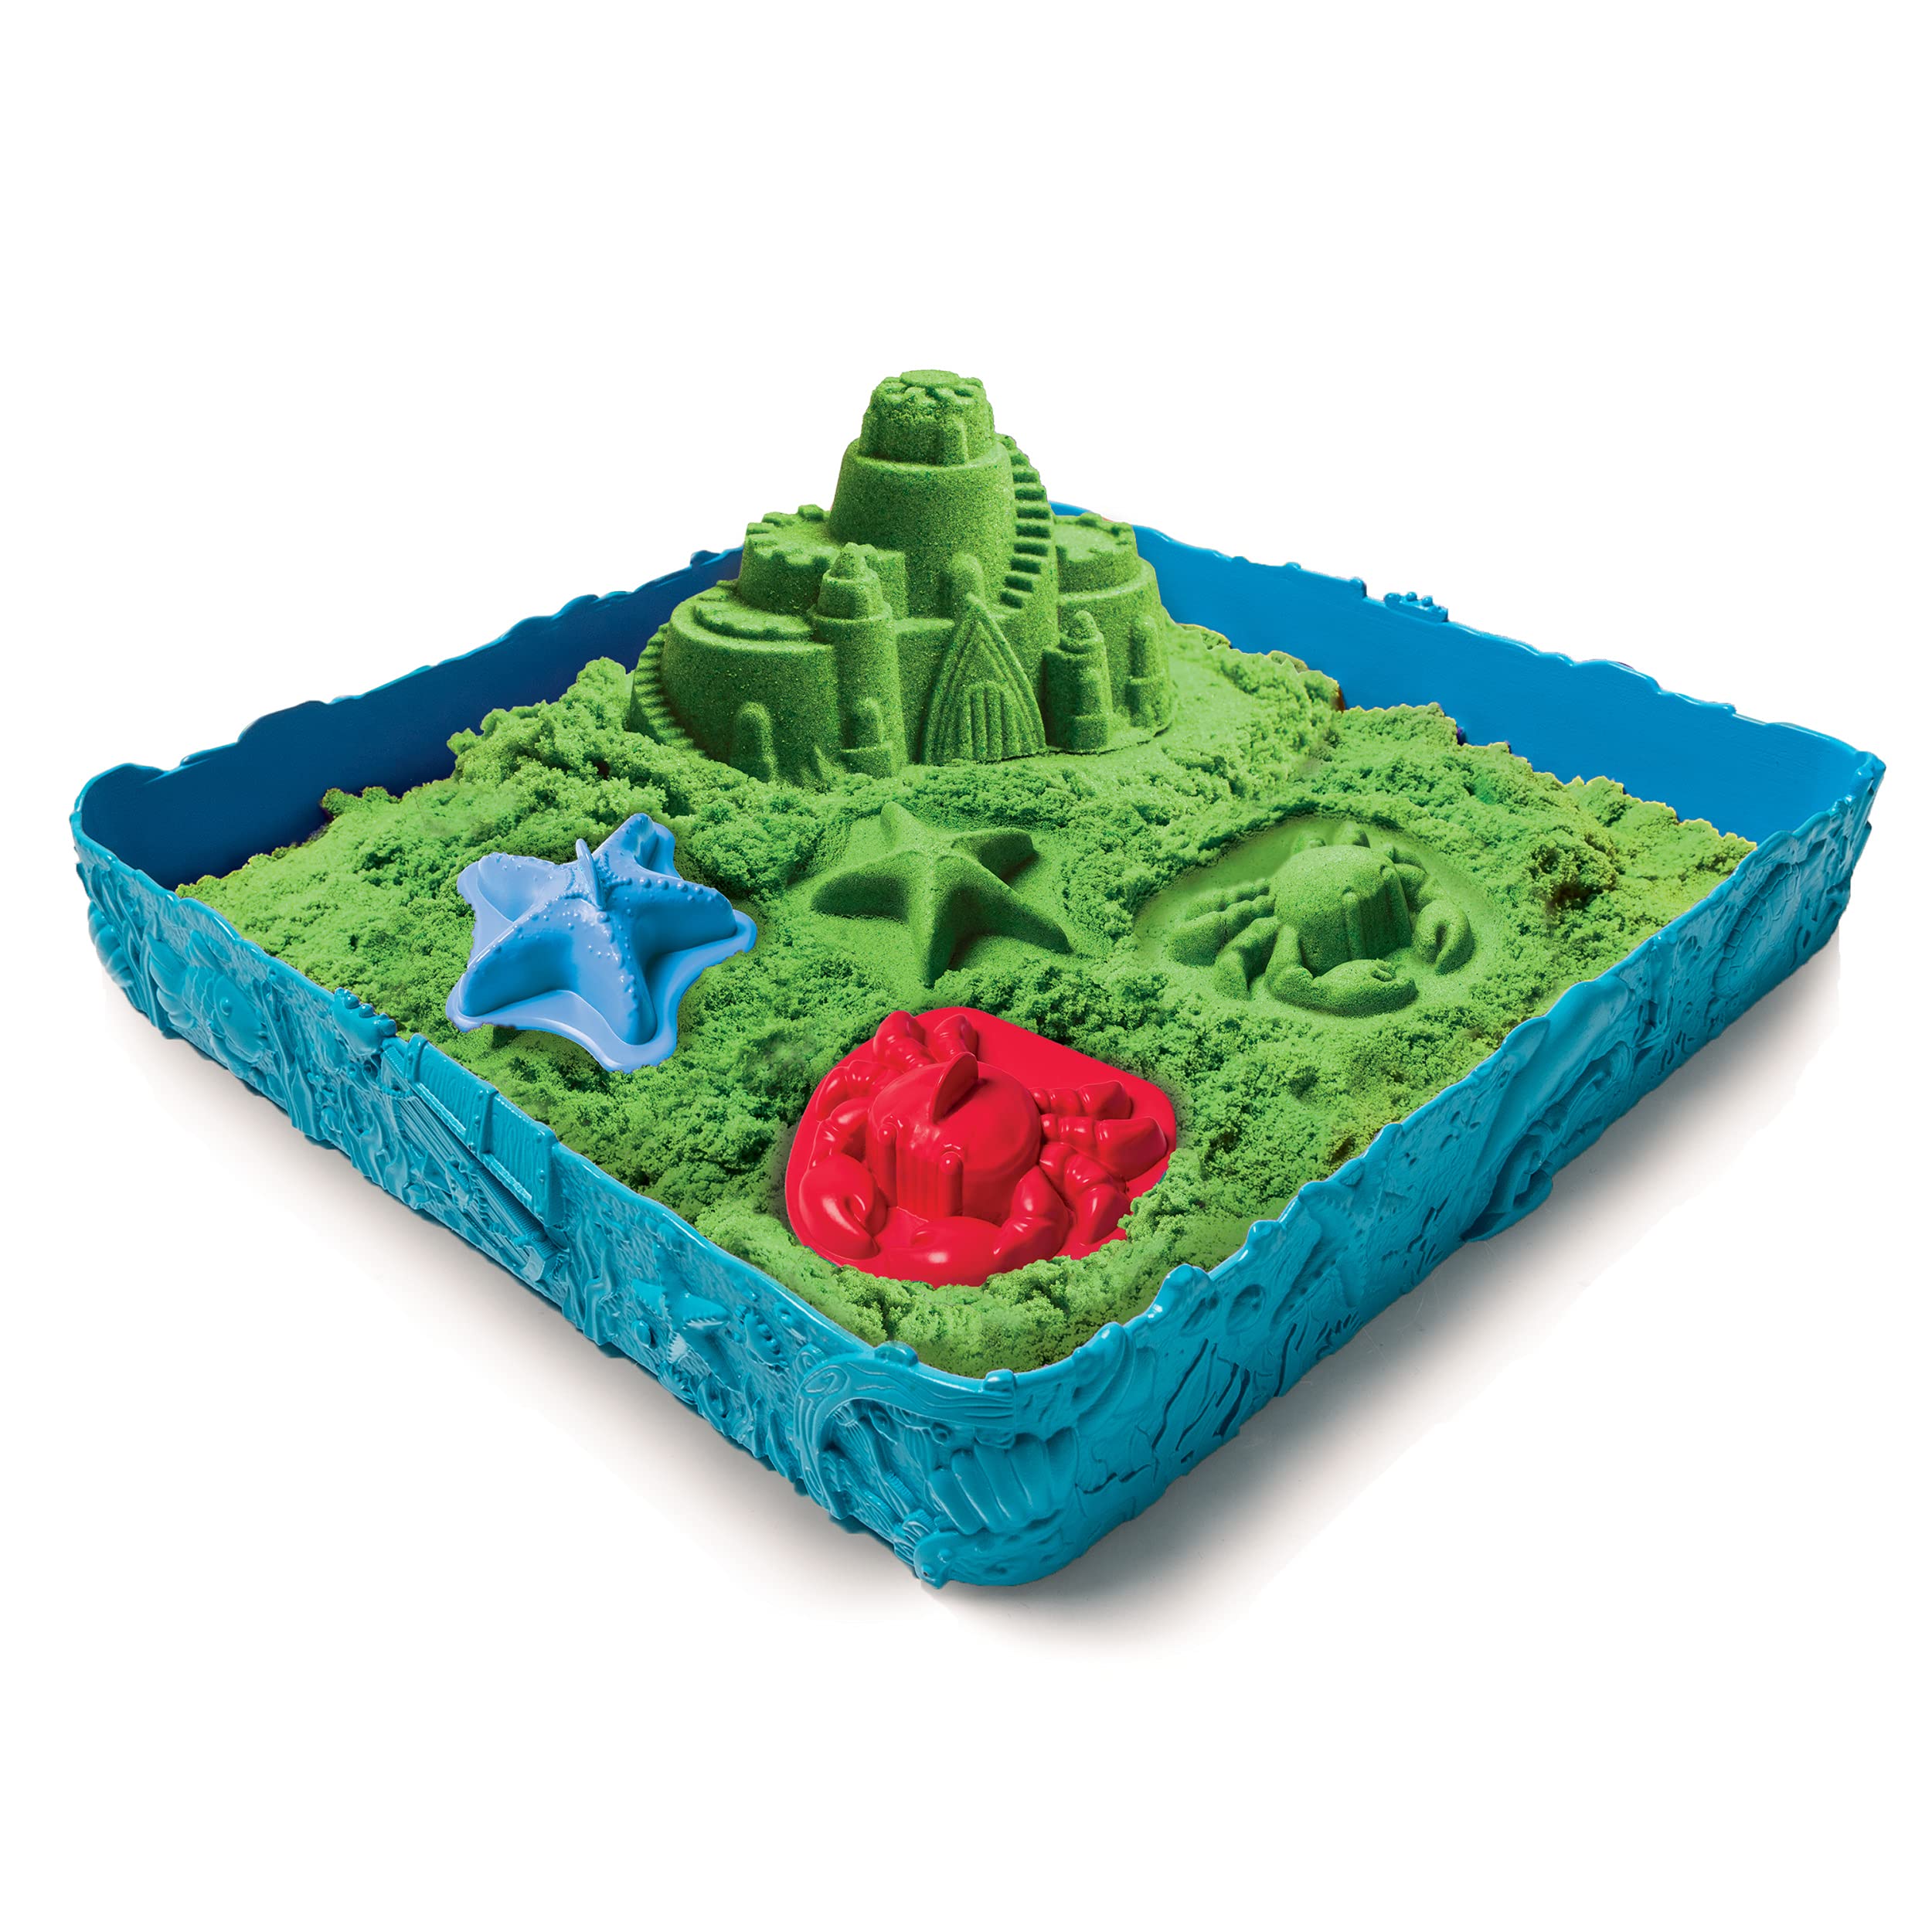 Kinetic Sand - Sandcastle Set with 1lb of Kinetic Sand and Tools and Molds (Color May Vary)